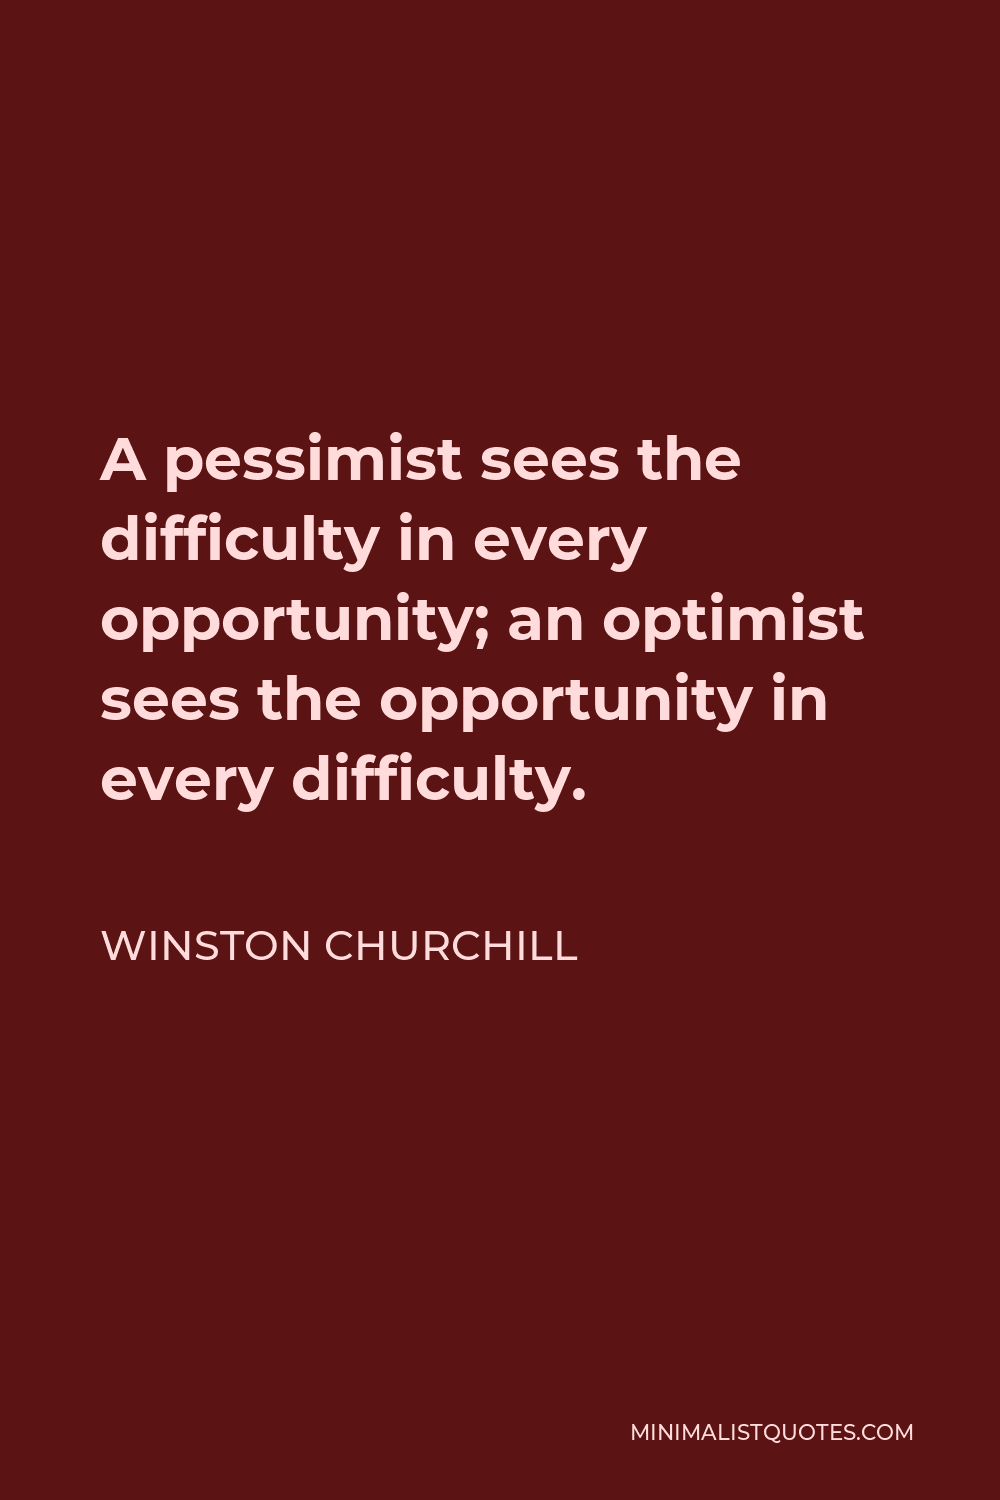 Winston Churchill Quote - A pessimist sees the difficulty in every opportunity; an optimist sees the opportunity in every difficulty.